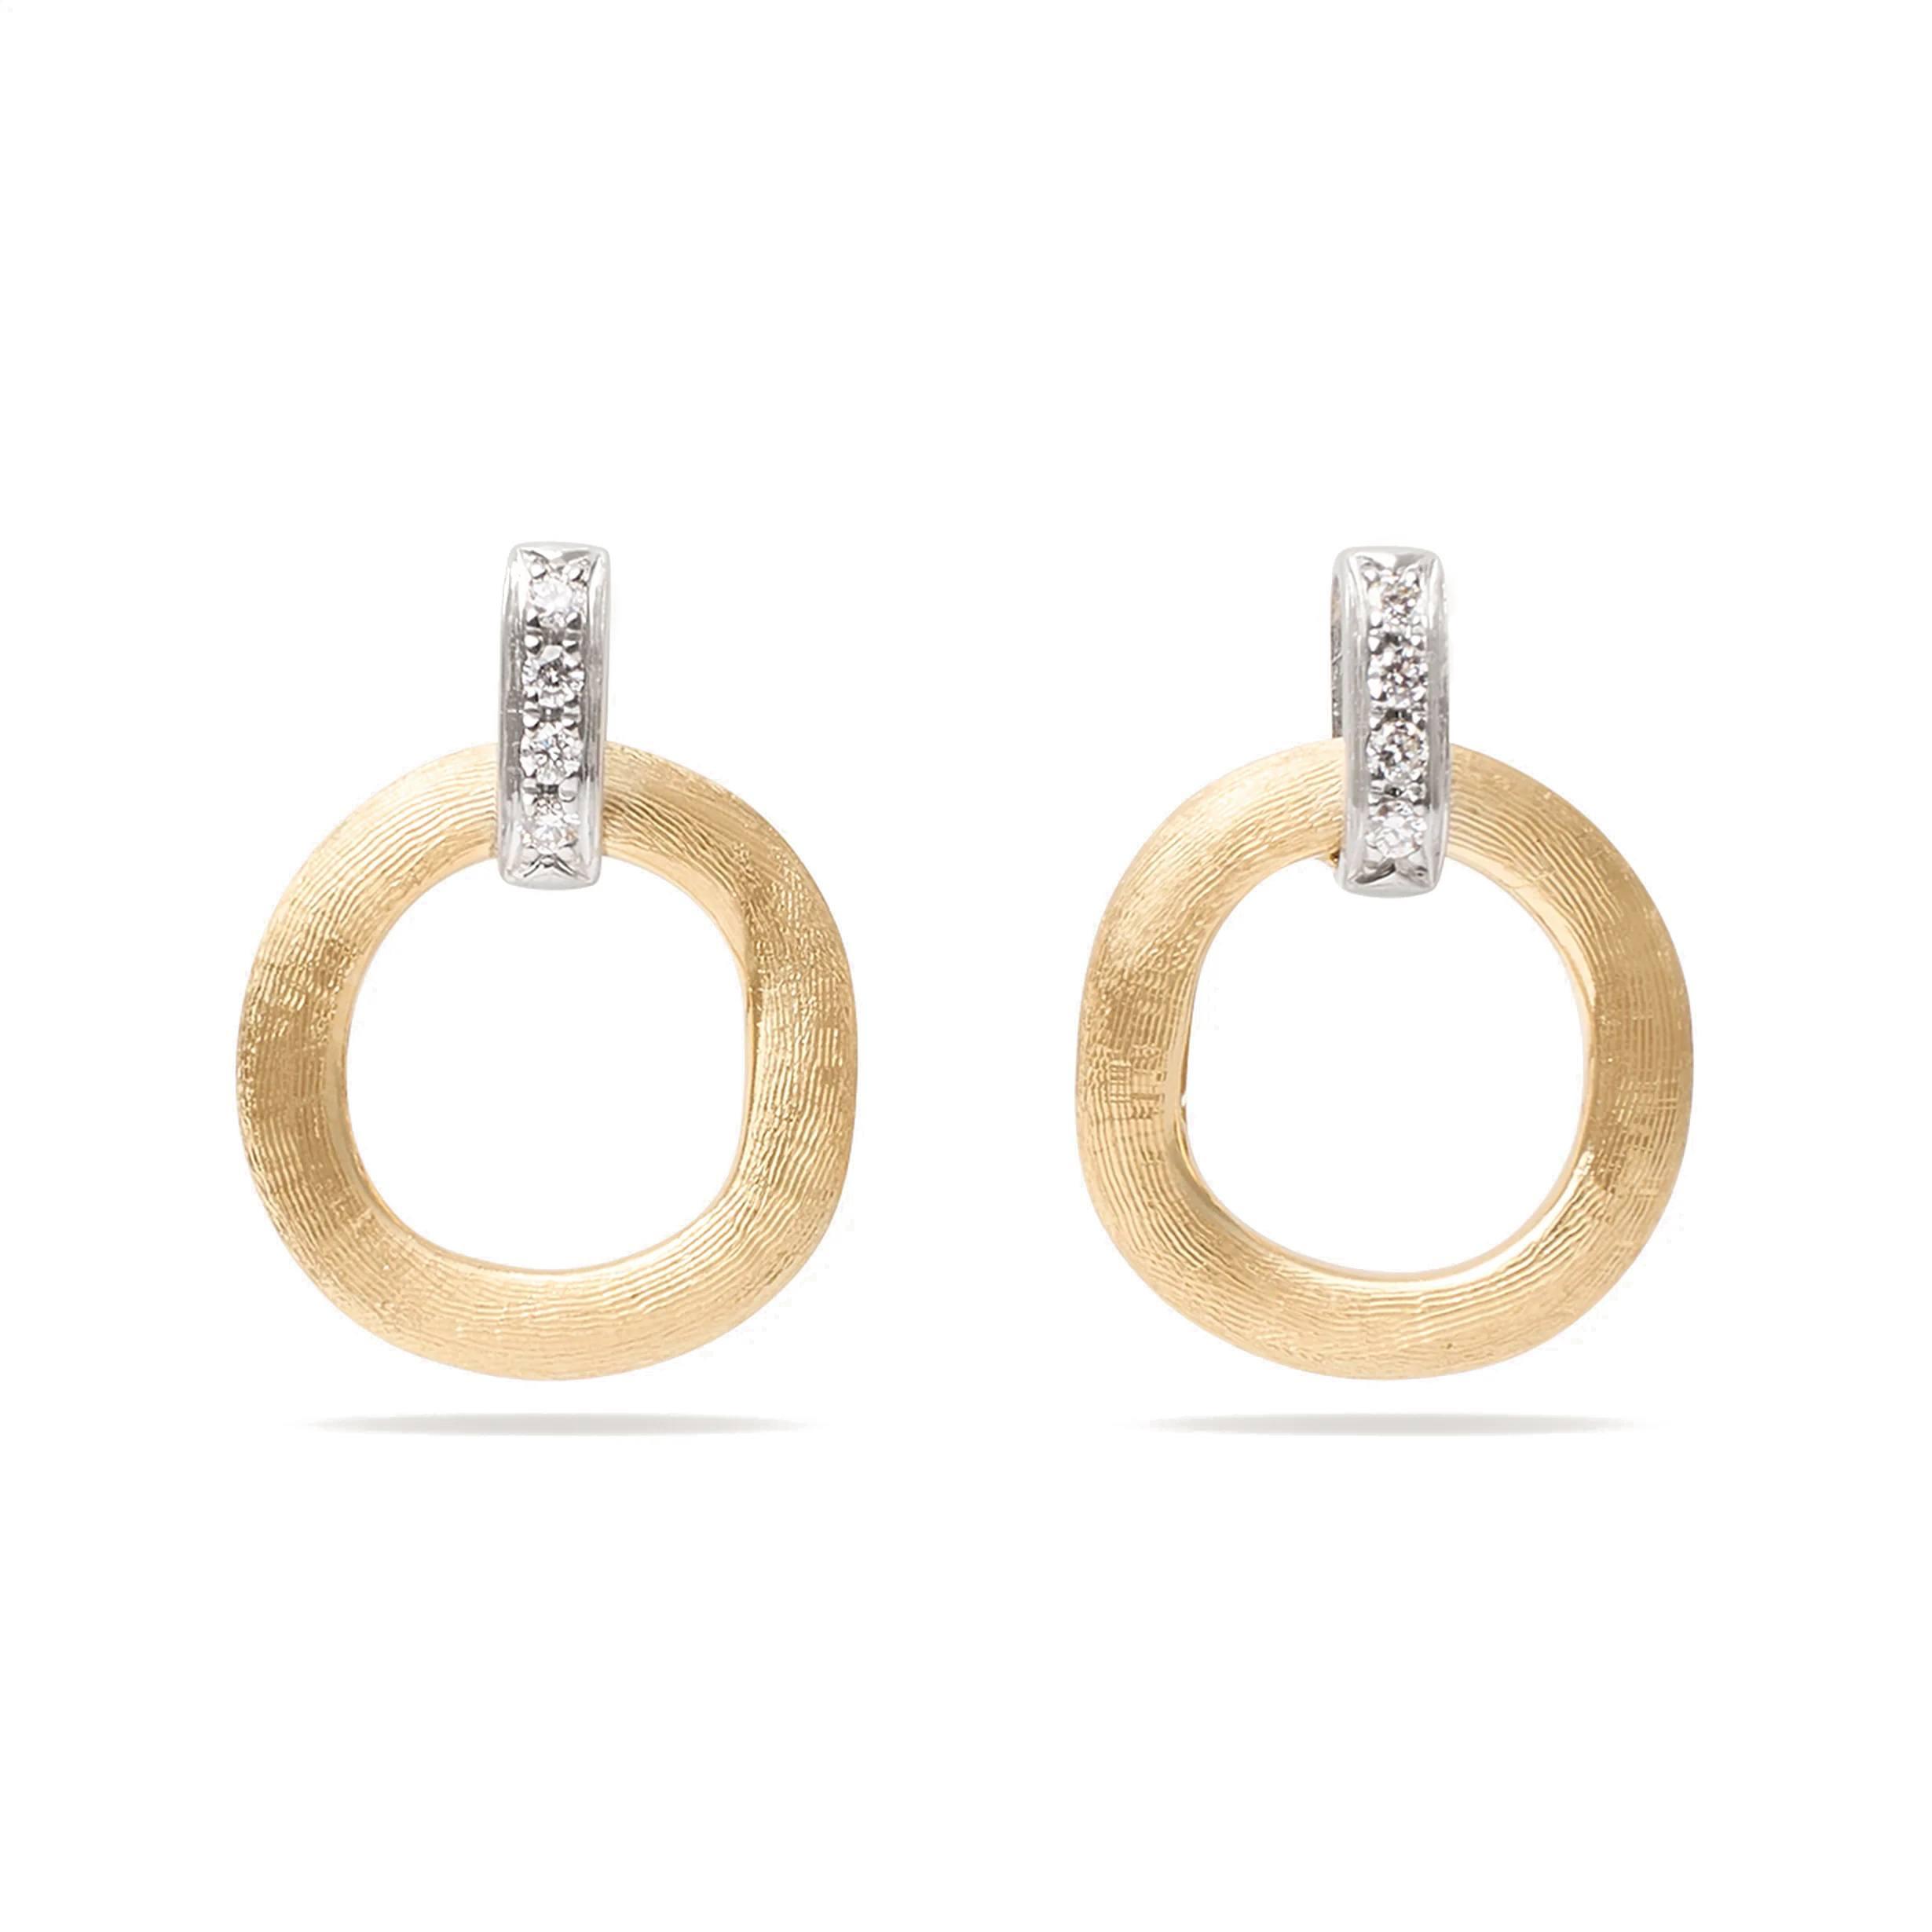 Marco Bicego Jaipur Gold Stud Drop Earrings with Diamonds 0